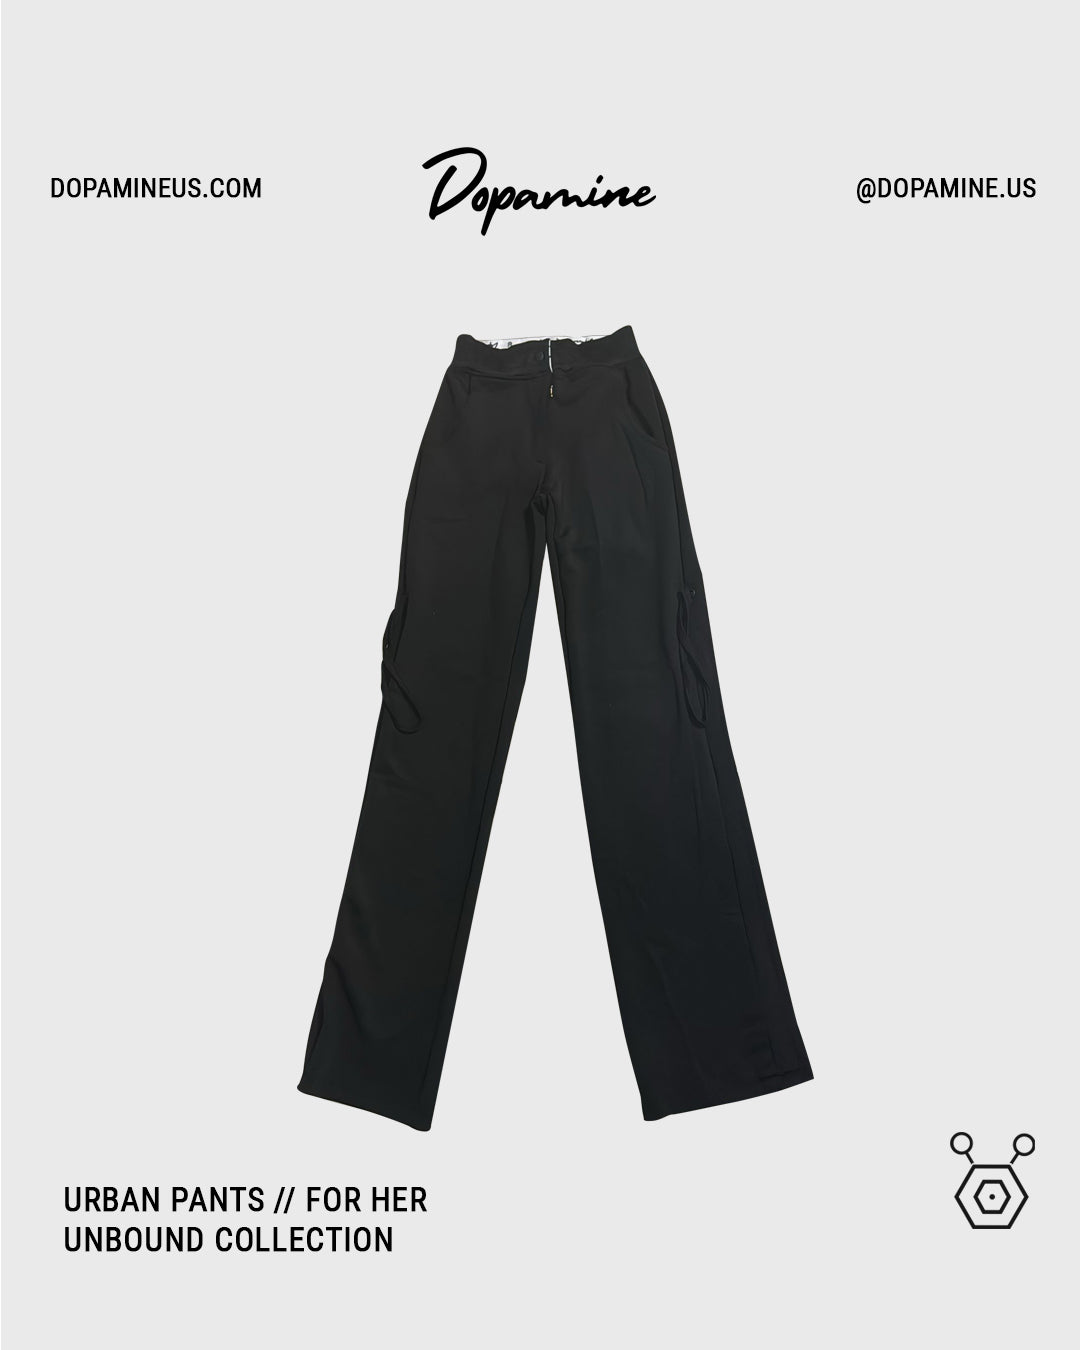 Urban pants - For Her